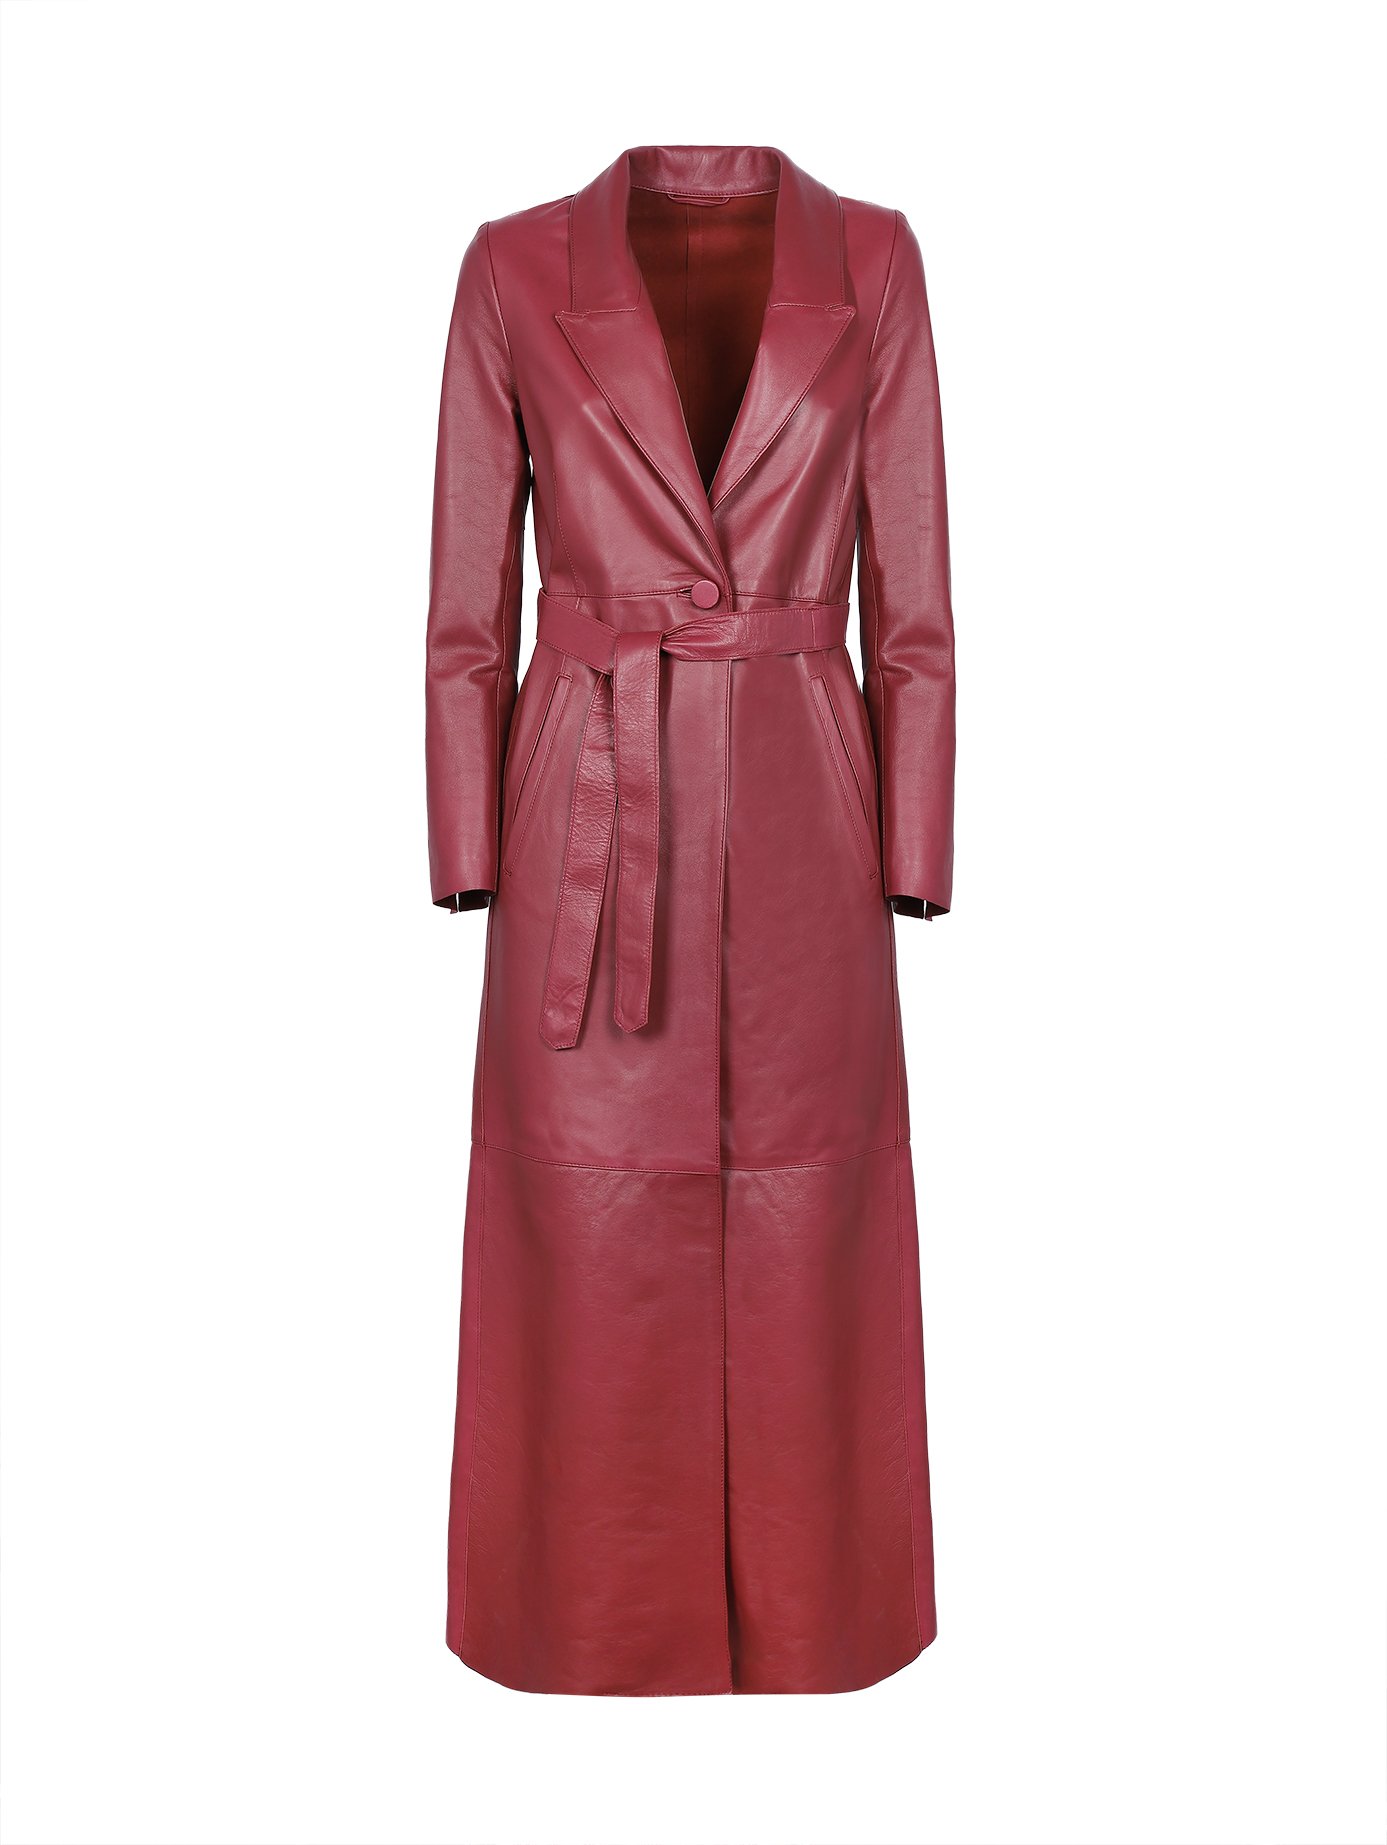 Long Single-breasted Belted Leather Coat Red Wine